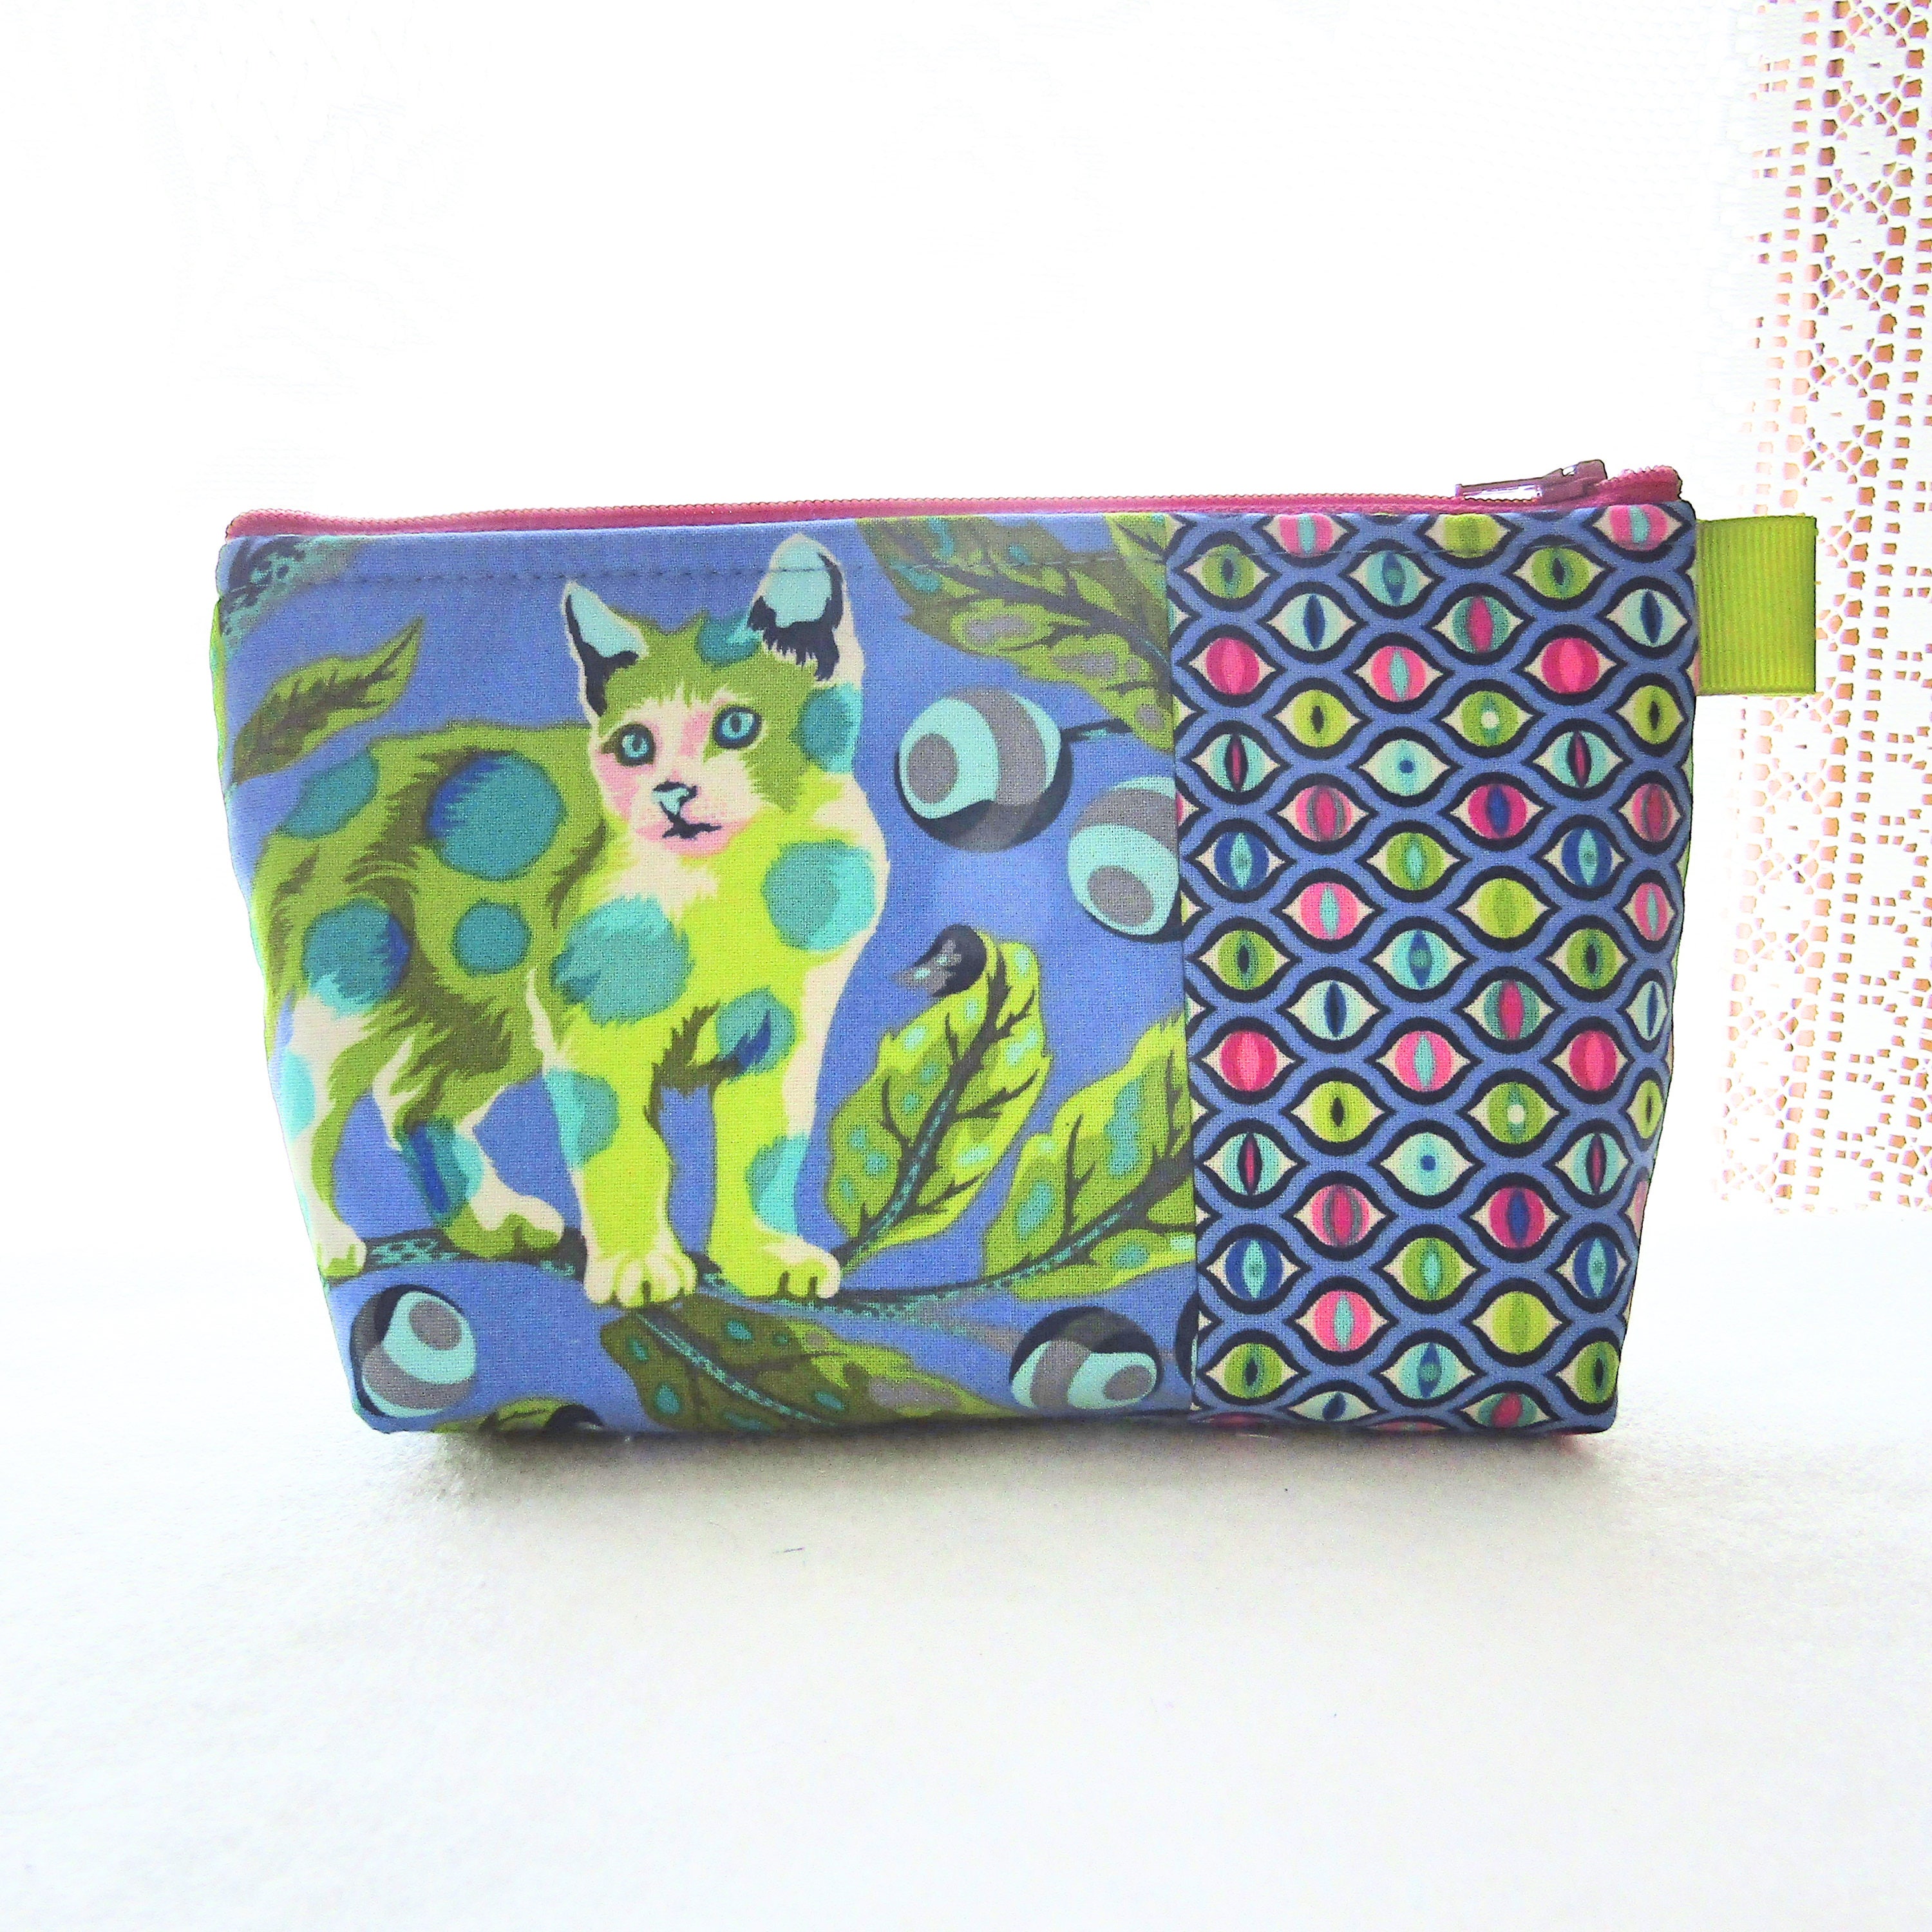 Disco Kitty Tula Pink Fabric Large Cosmetic Bag Zipper Pouch